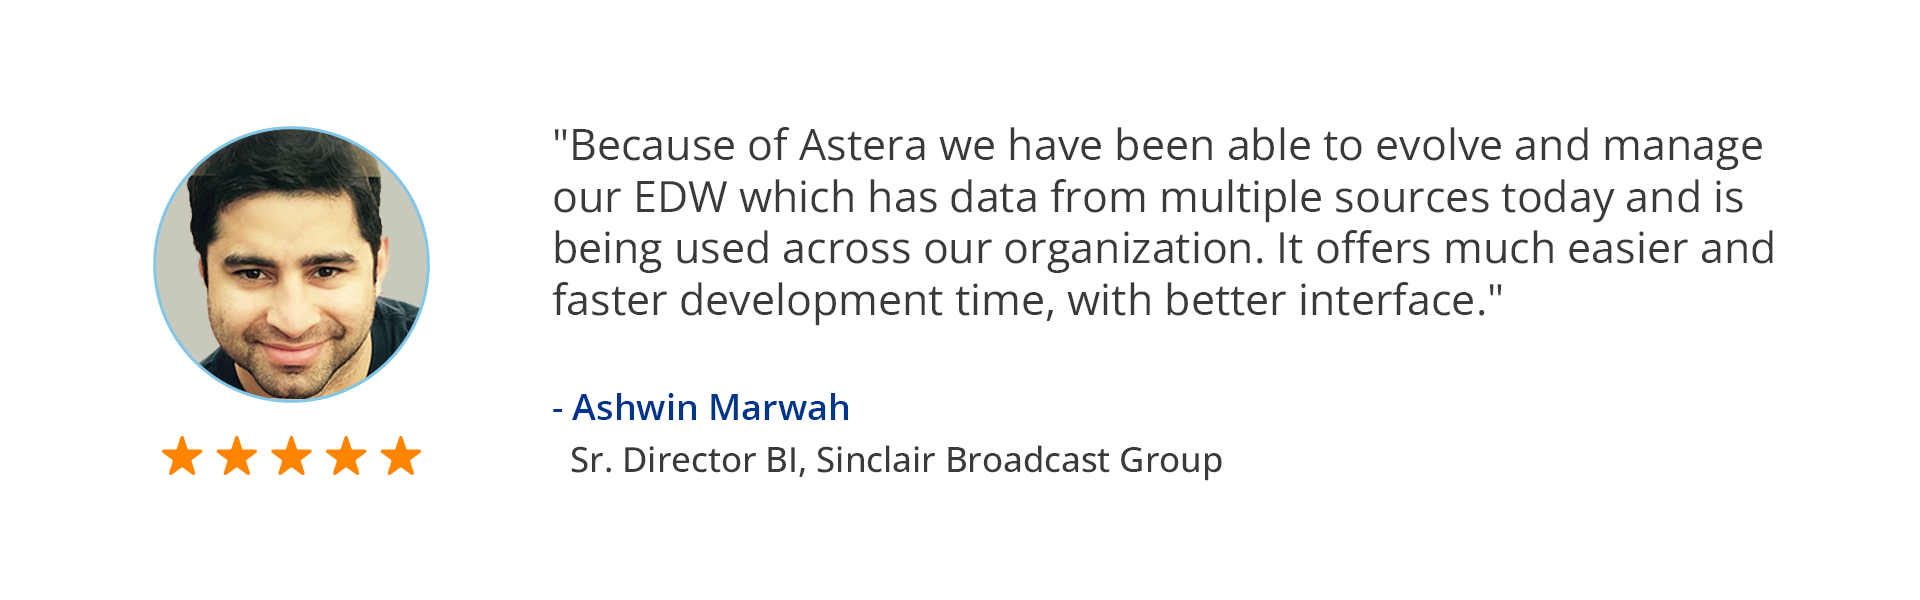 A client review for Astera.